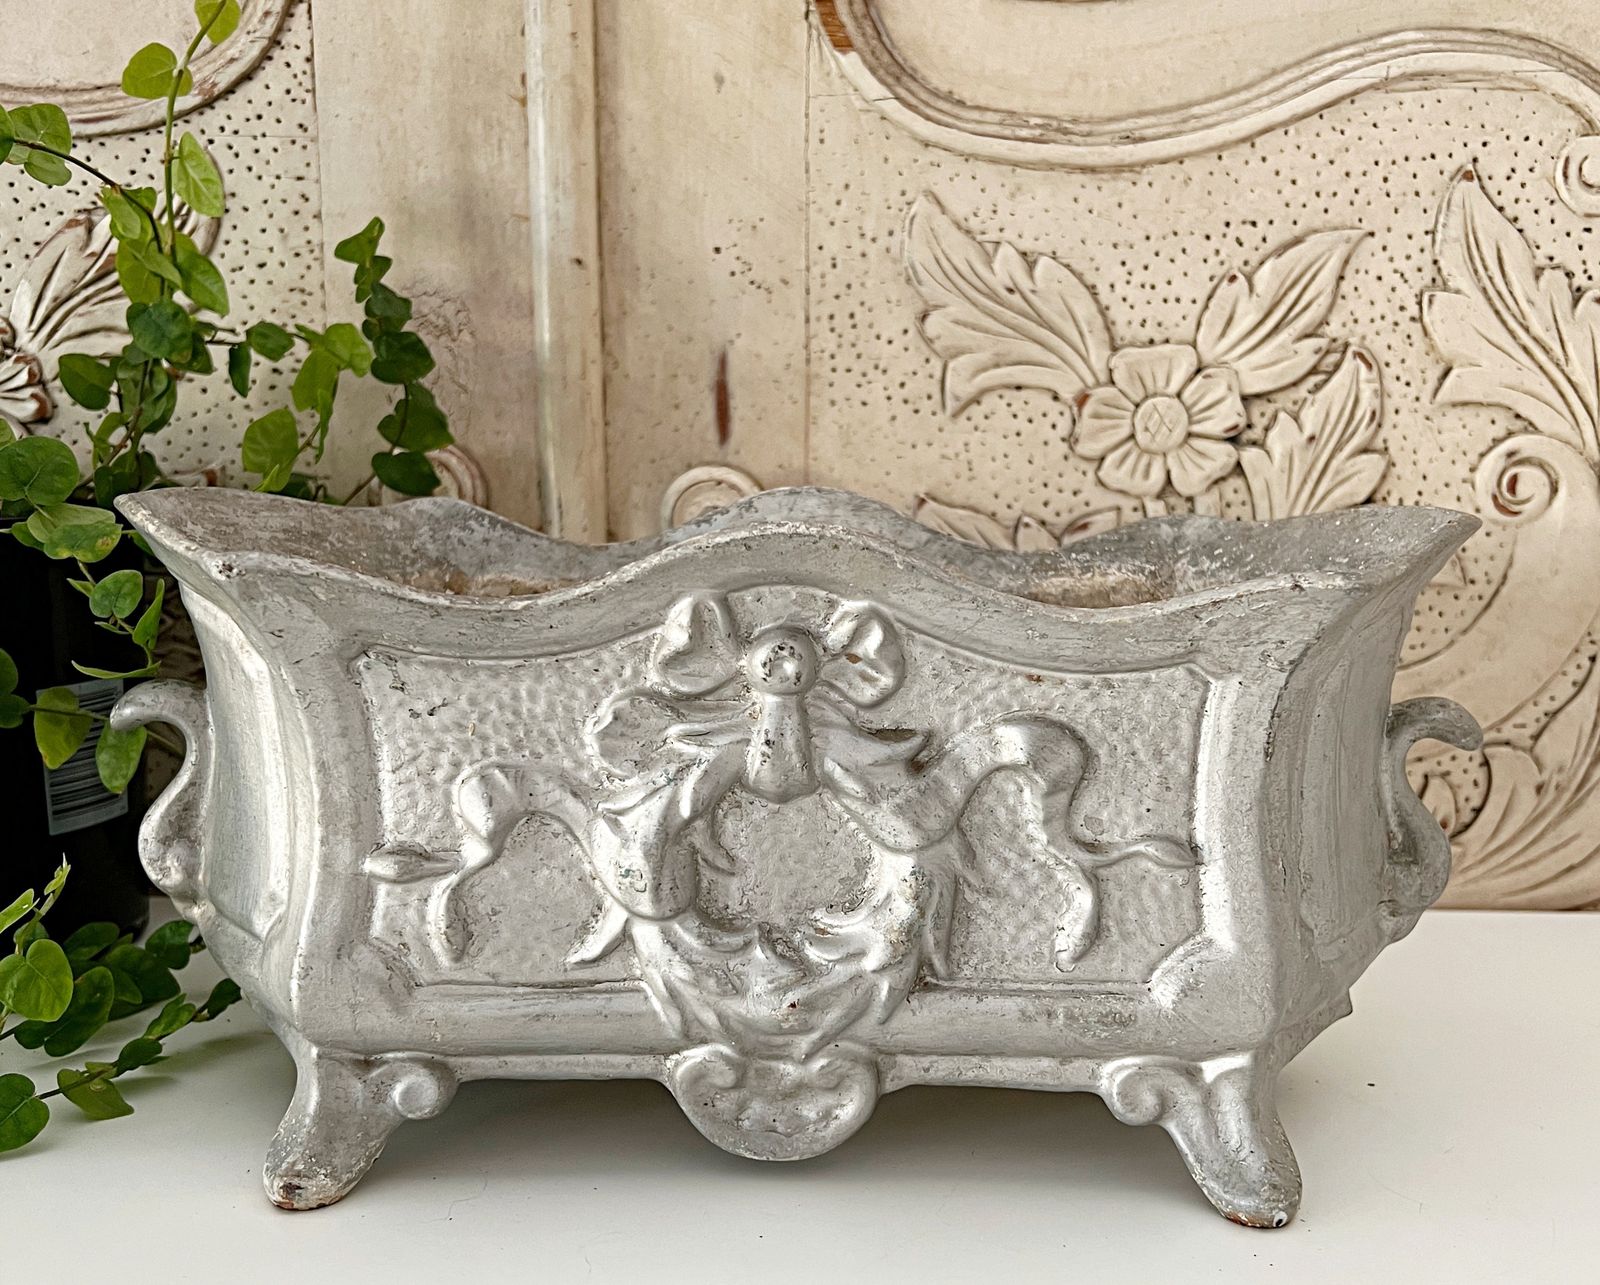 Antique French Iron Table Jardiniere Planter Box Painted Silver - FR679   for sale